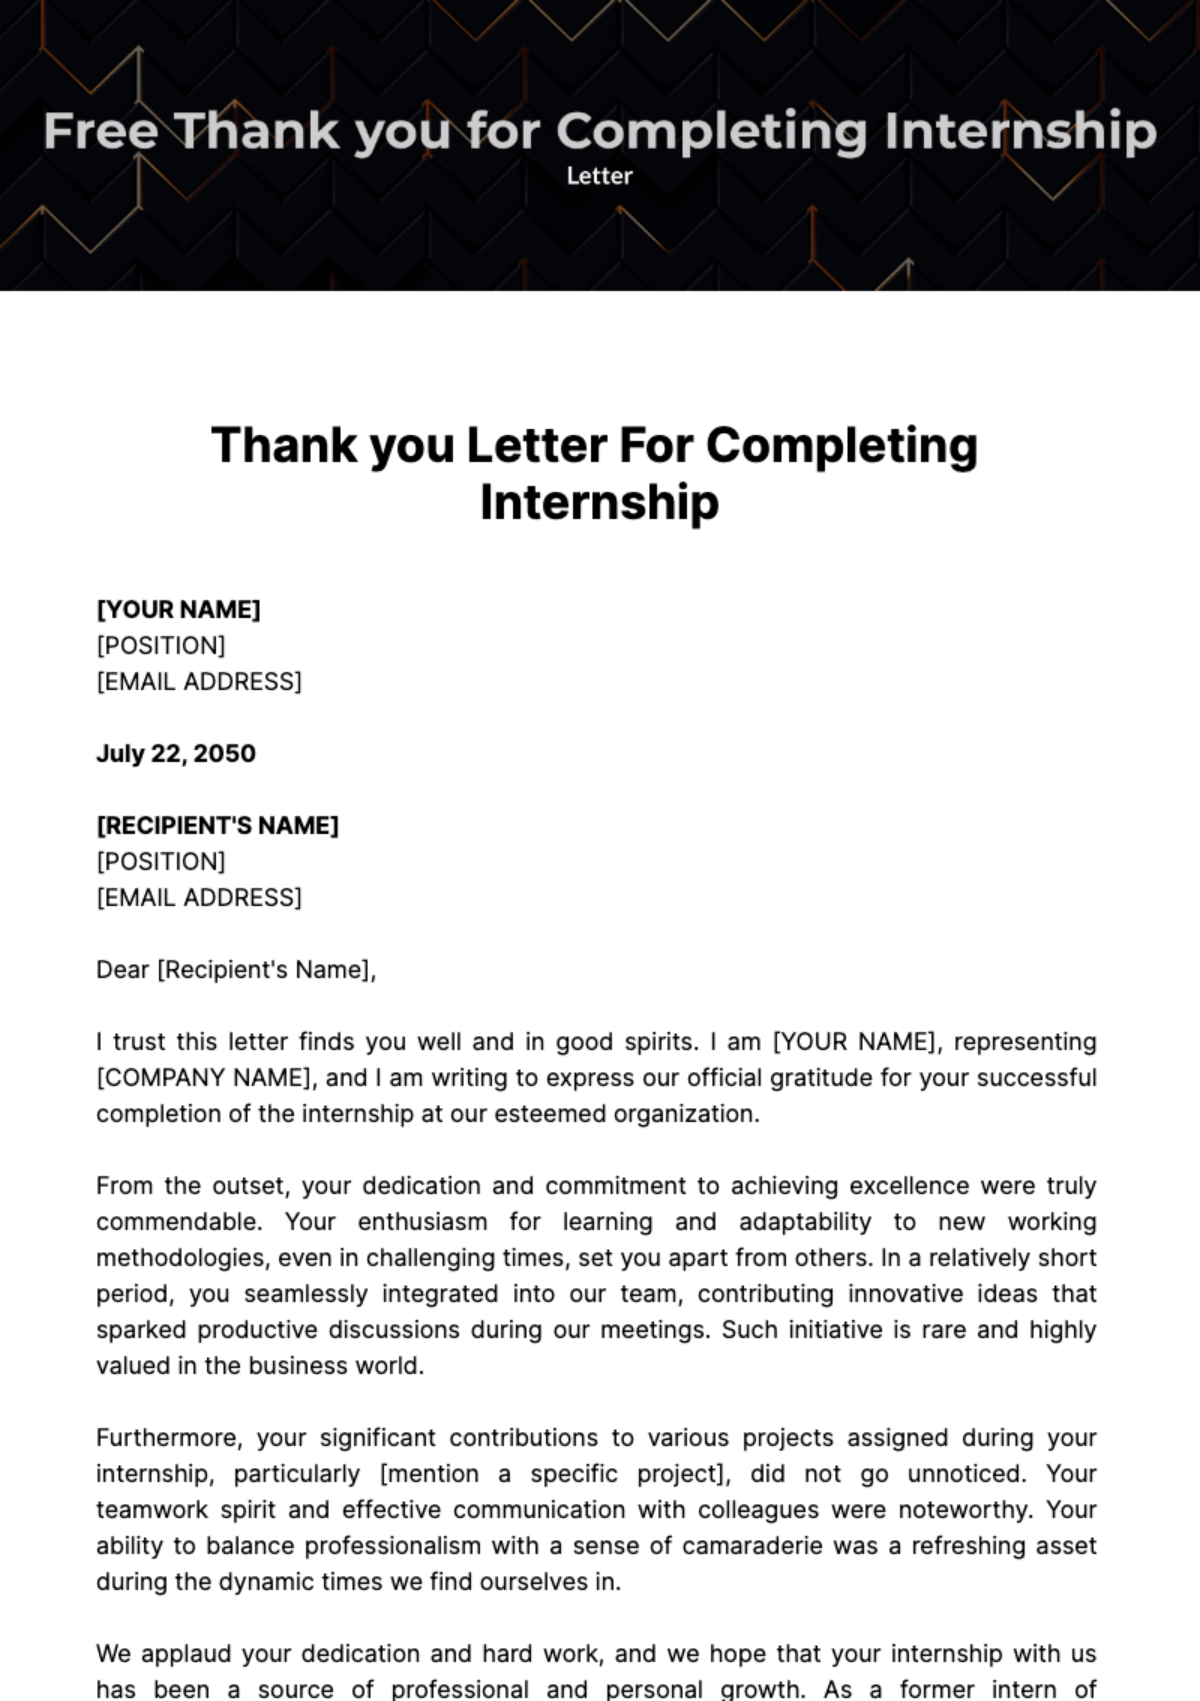 Free Thank you Letter for Completing Internship Template